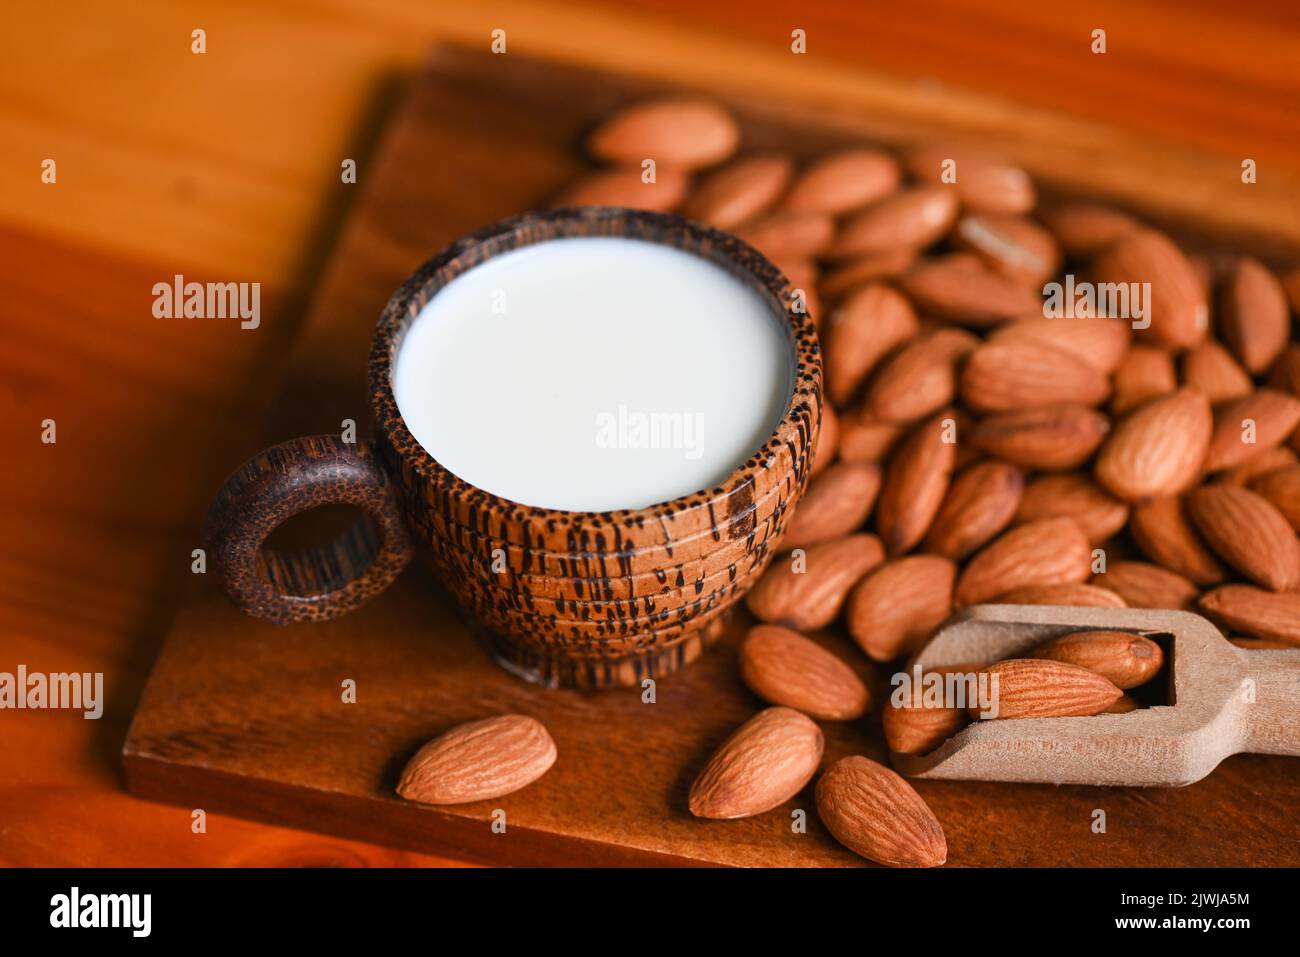 Almond milk and Almonds nuts on wooden background, Delicious sweet almonds on the table, roasted almond nut for healthy food and snack Stock Photo